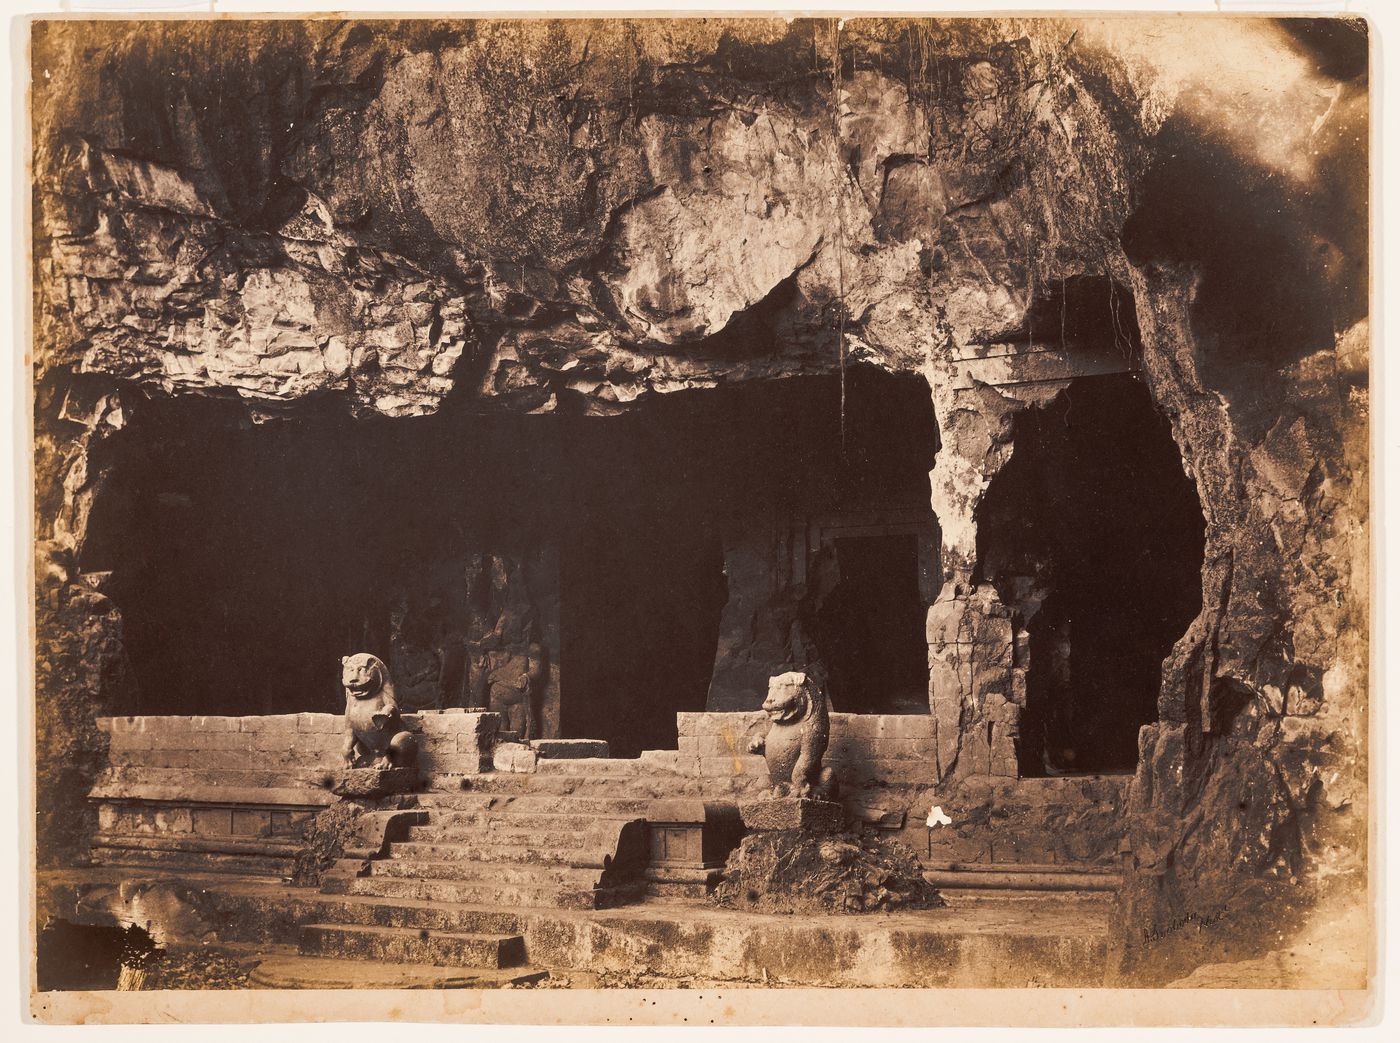 View of the façade and portico, Eastern Shrine, Cave No. 1 (also known as the Mahadeva Temple, the Shiva Cave and the Great Cave), Elephanta Caves, Elephanta Island, India